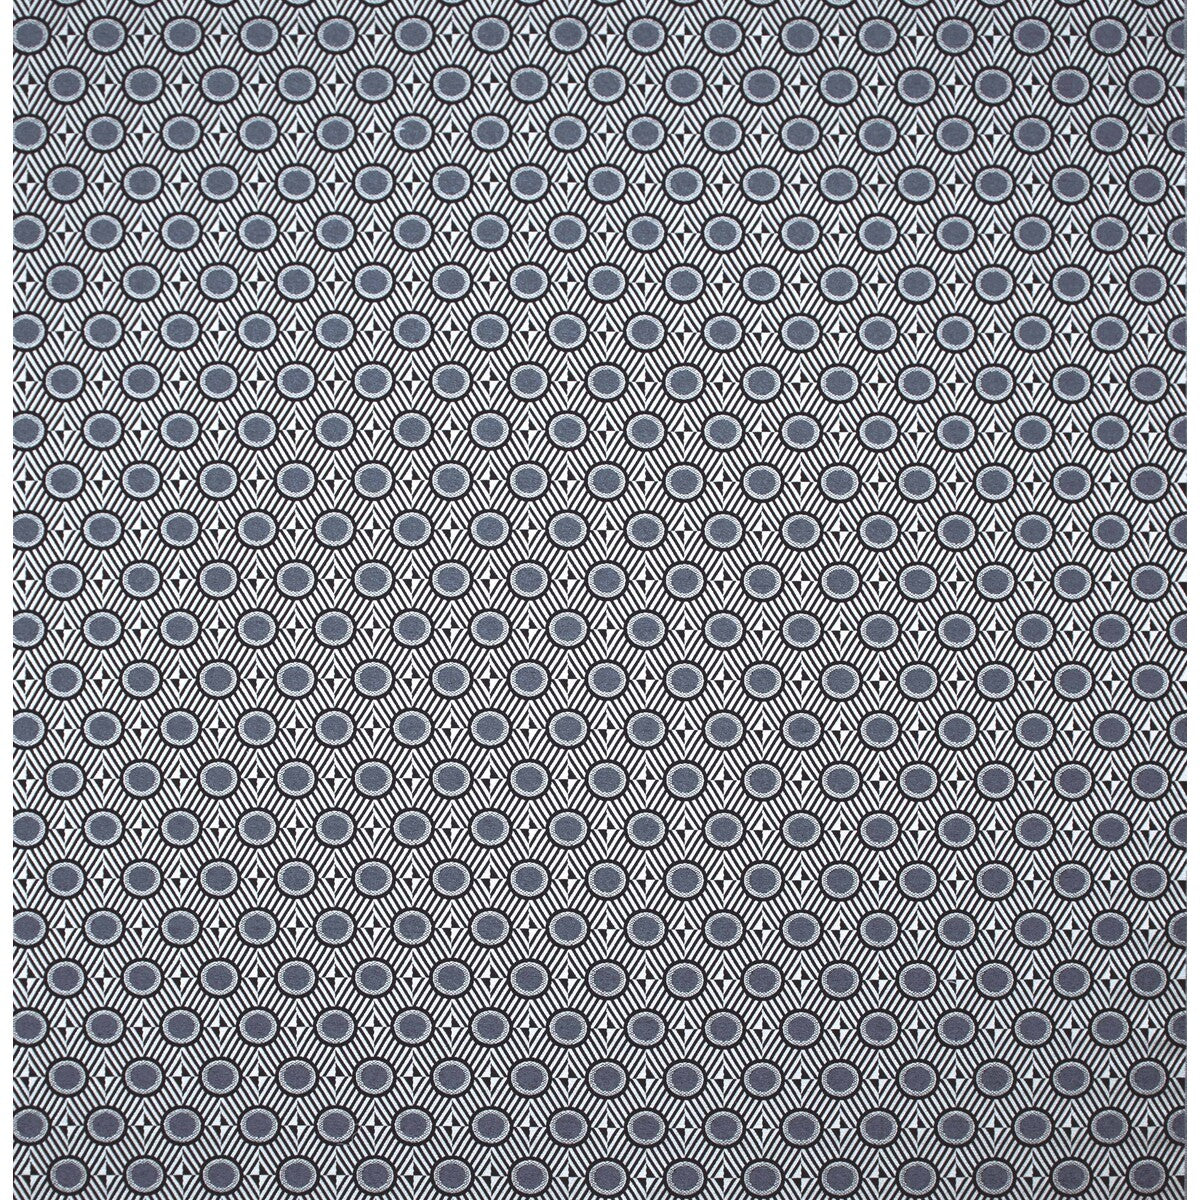 Morley fabric in gris color - pattern GDT5400.1.0 - by Gaston y Daniela in the Gaston Africalia collection